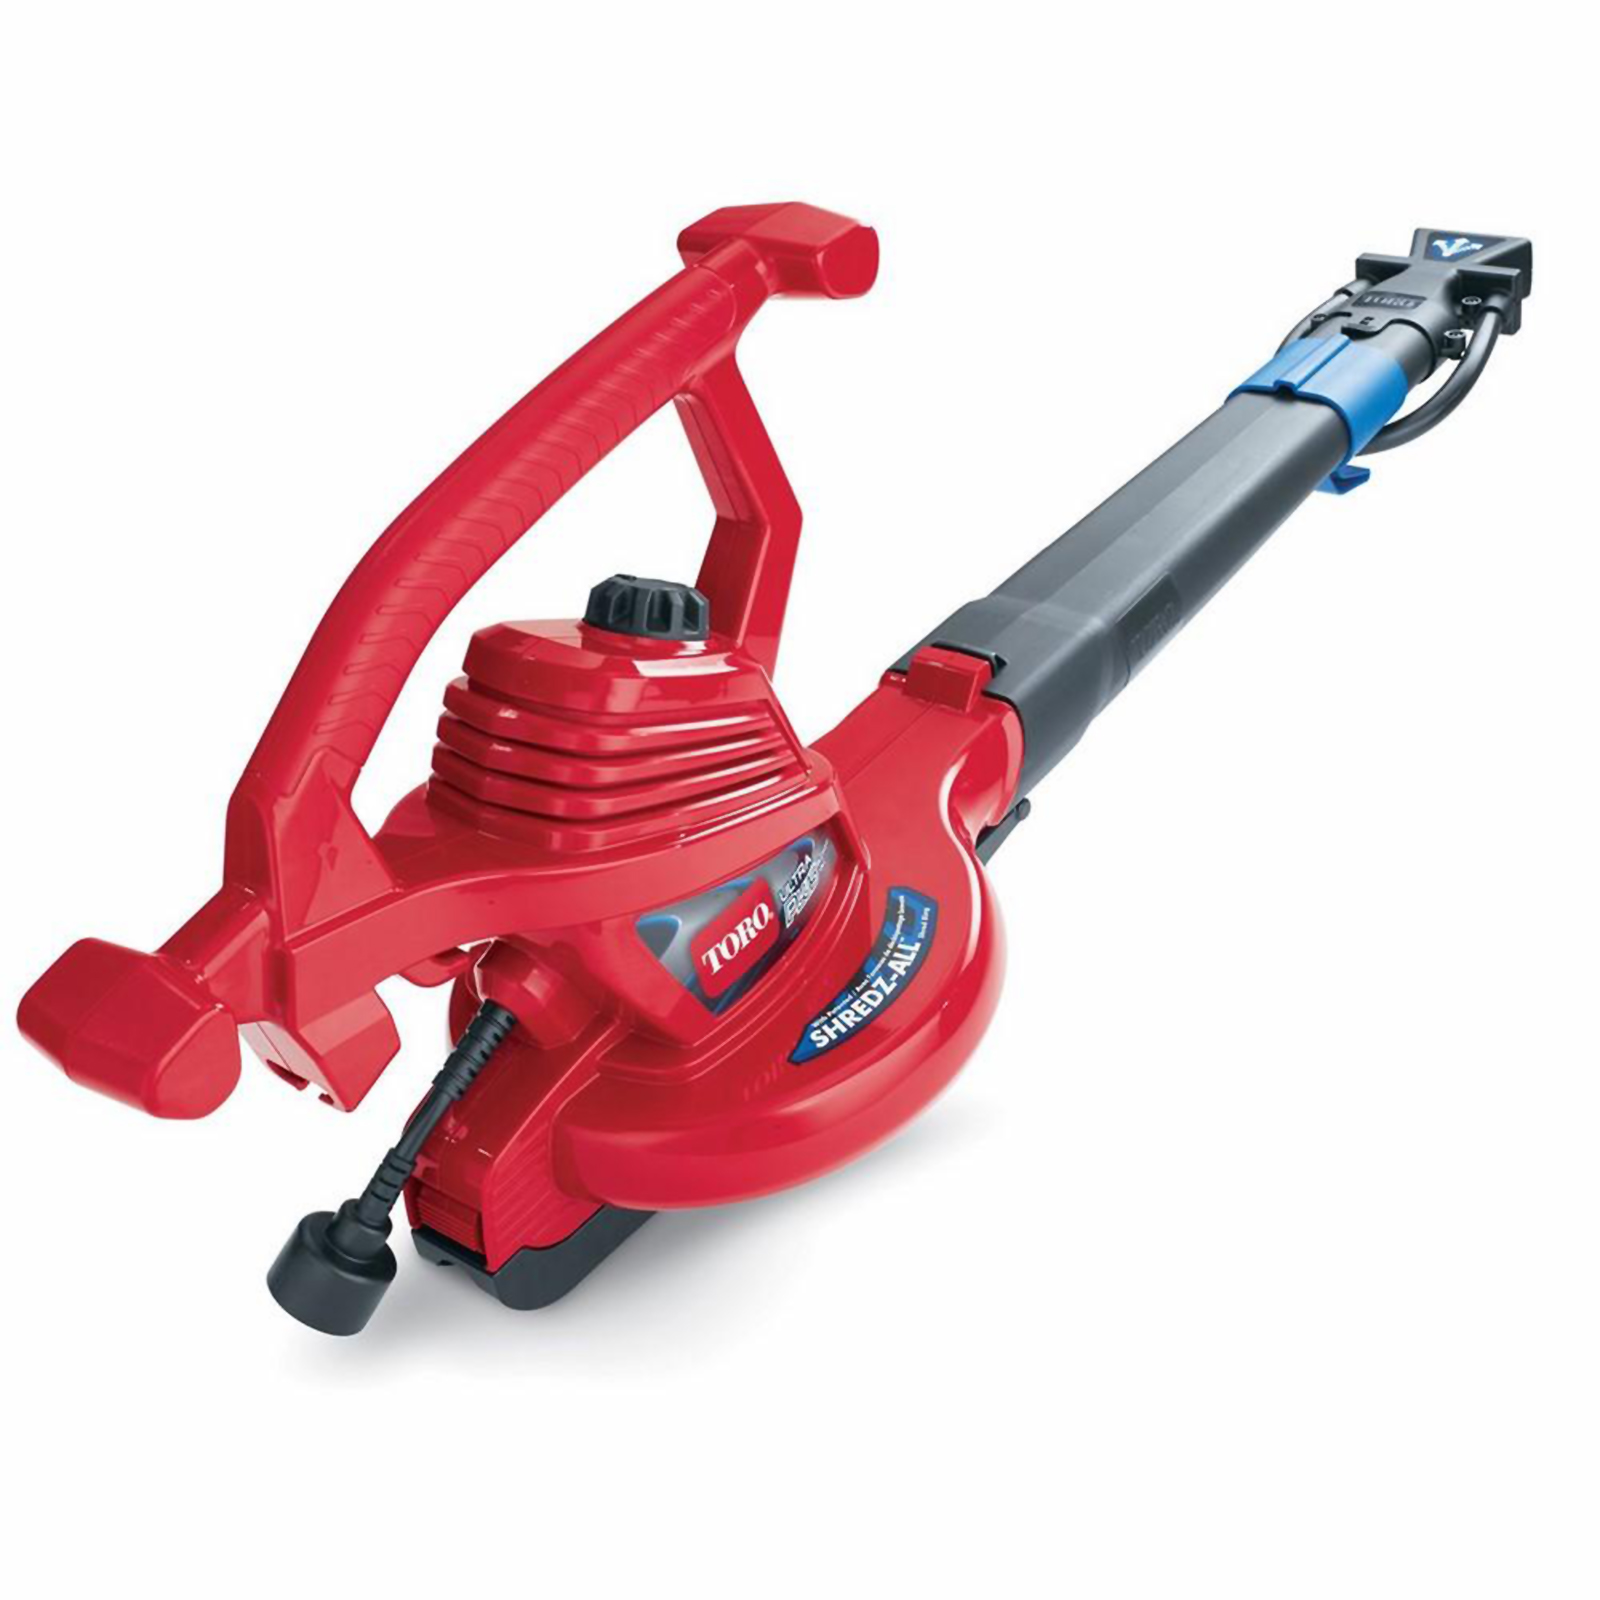 Photo 1 of Toro The Toro Company Toro UltraPlus Leaf Blower Vacuum, Variable-Speed (up to 250 mph) with Metal Impeller, 12 amp